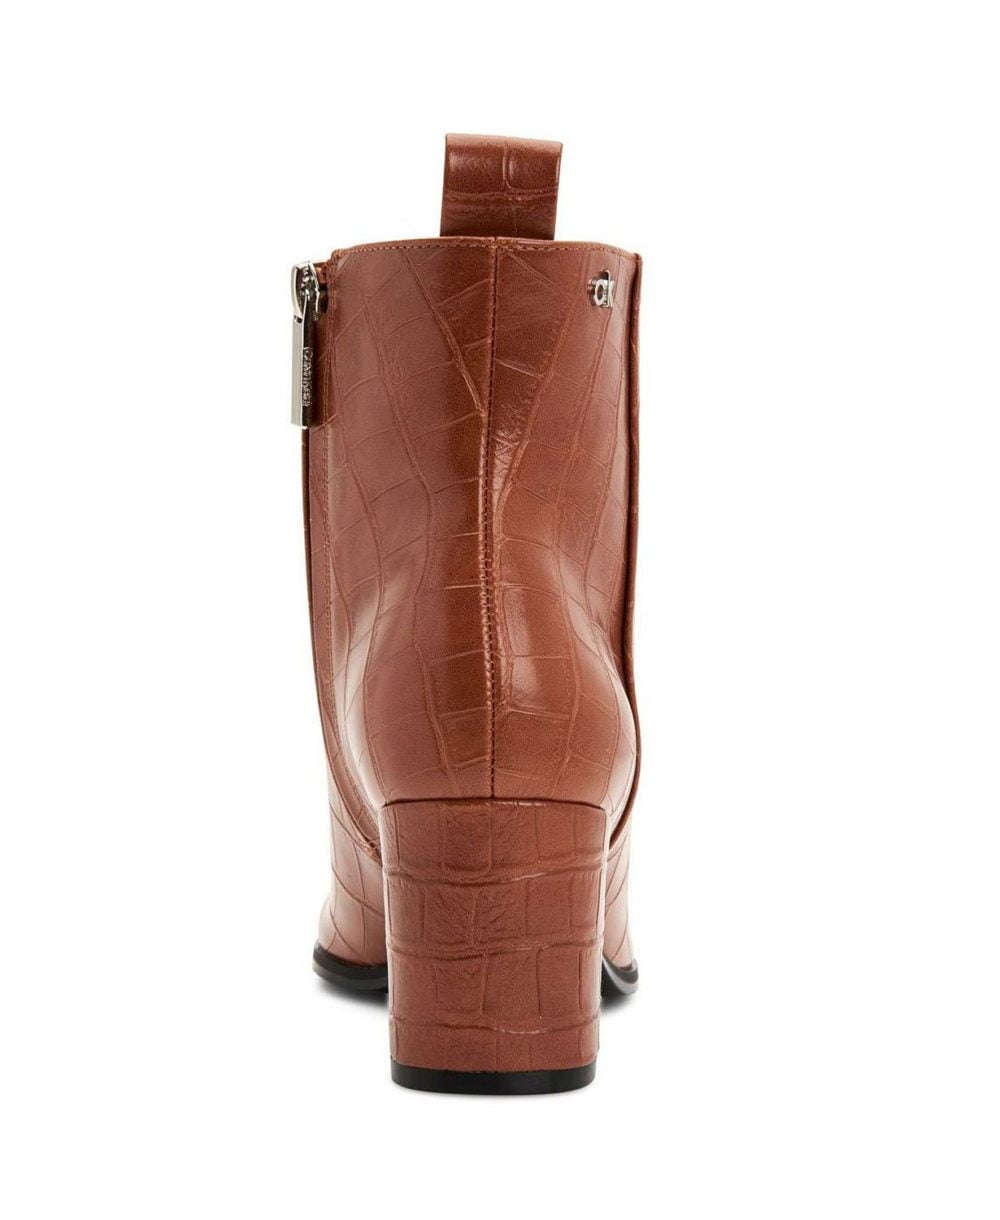 www.couturepoint.com-calvin-klein-womens-brown-crocodile-emboss-deni-booties